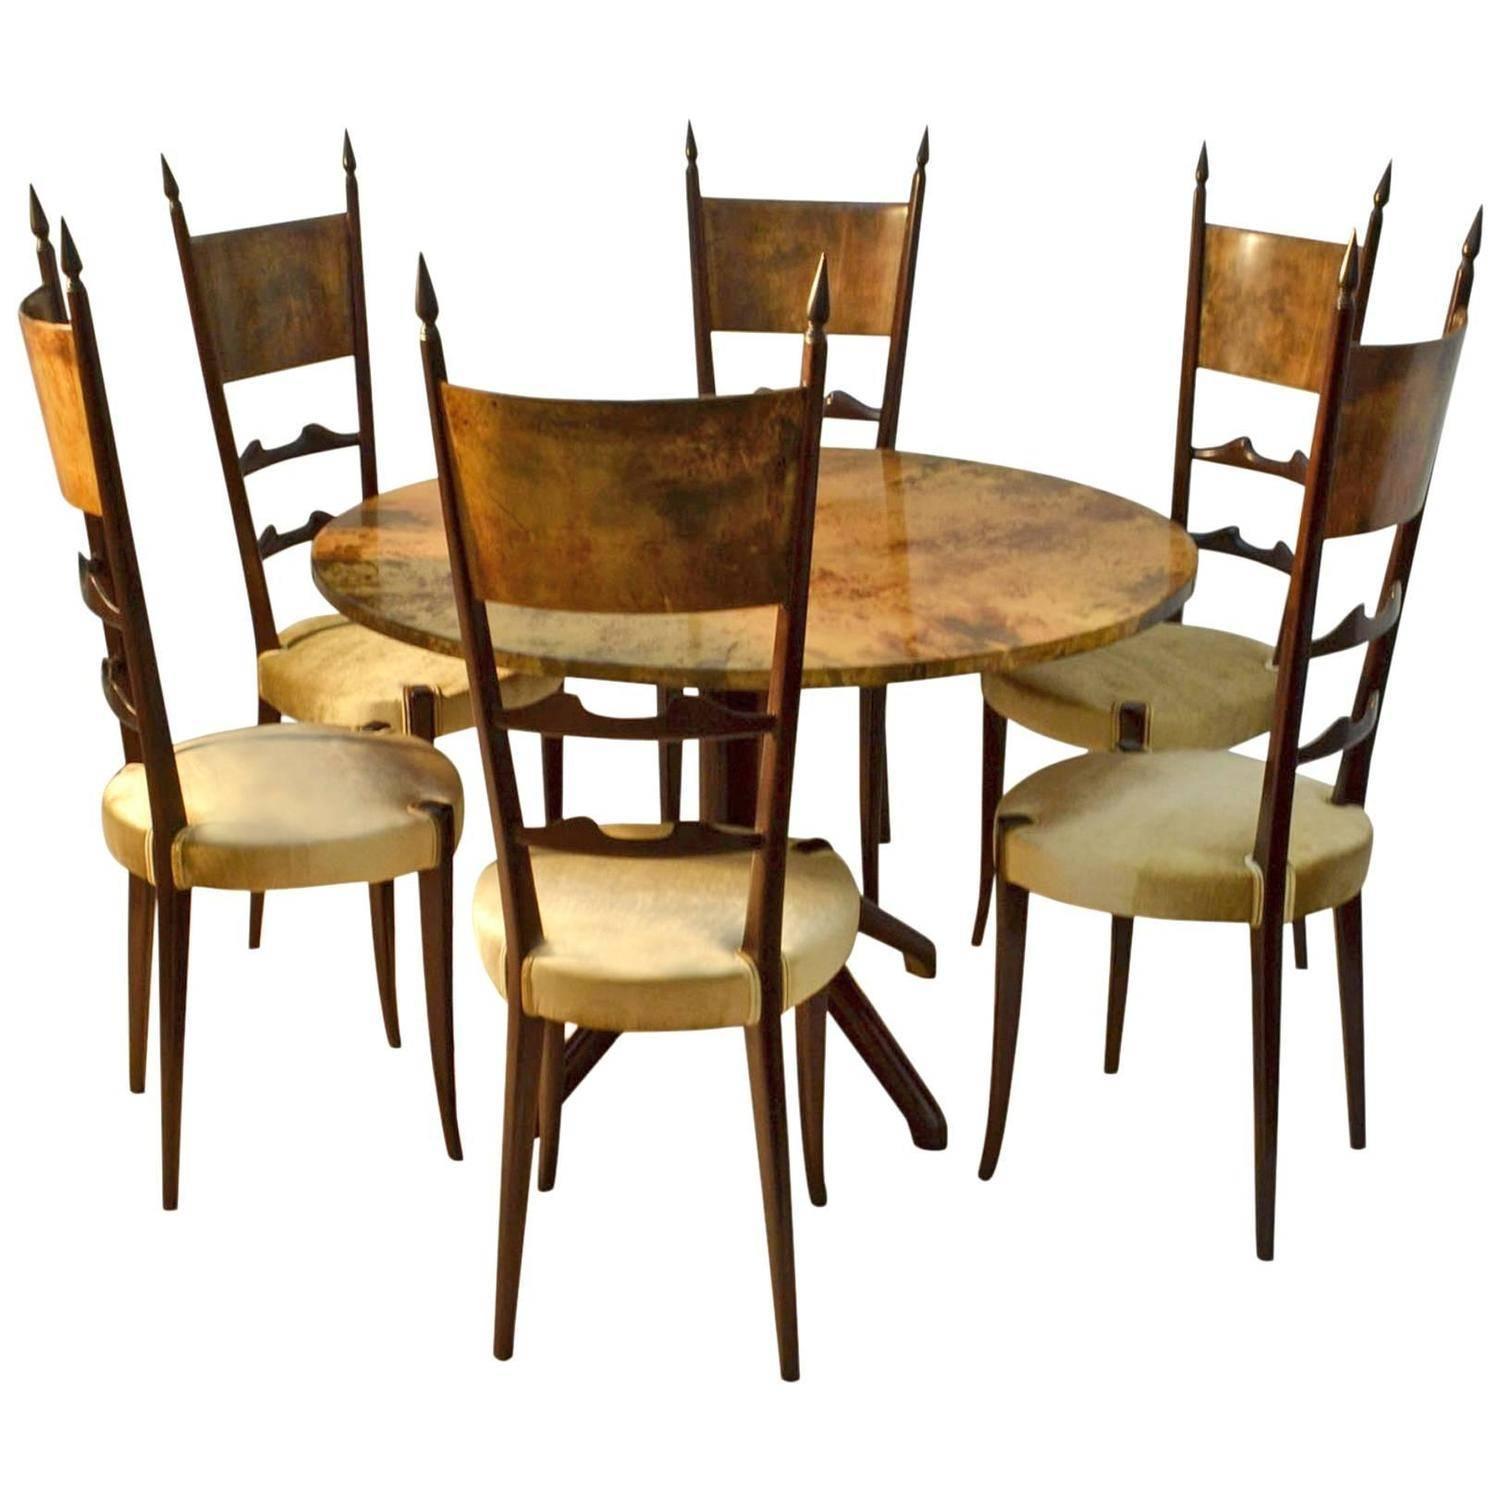 Exquisite 1950s high back dining chairs that have a regal quality.
The back panels of the chairs are in goatskin or parchment and the frames are ebonized wood. They are reupholstered in beige silk velvet.
They are in excellent condition.
There is